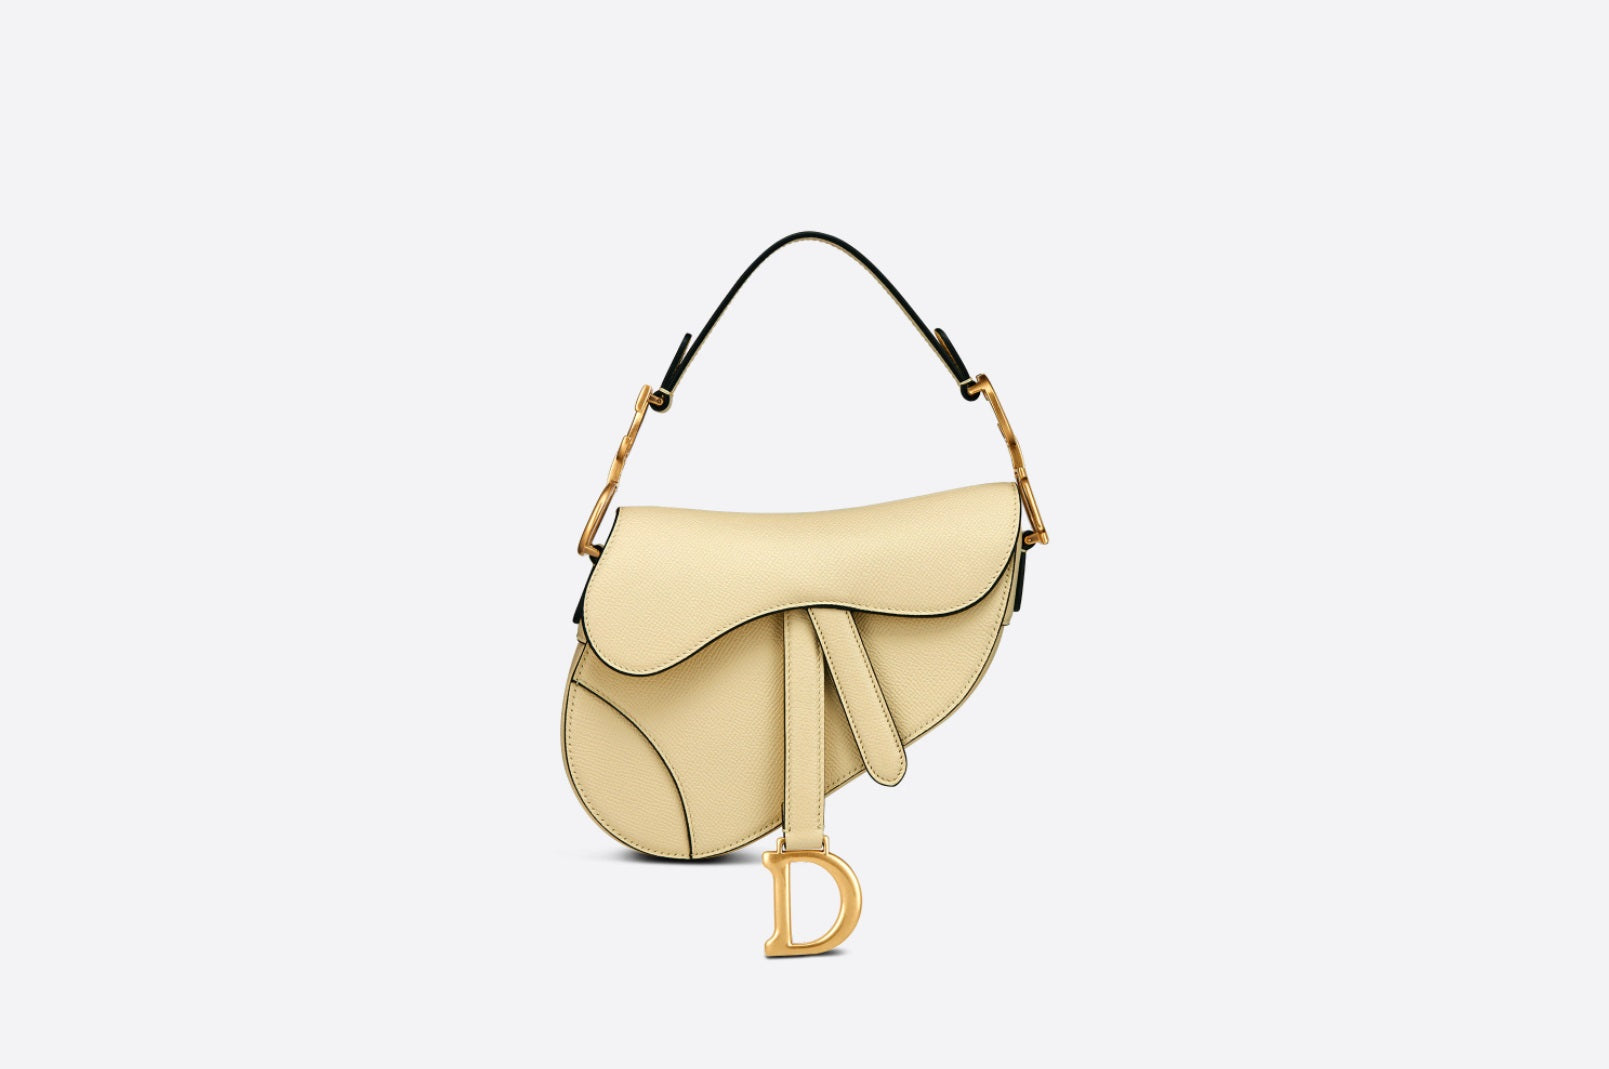 Christian Dior Saddle Bag Reference Guide: History, Prices